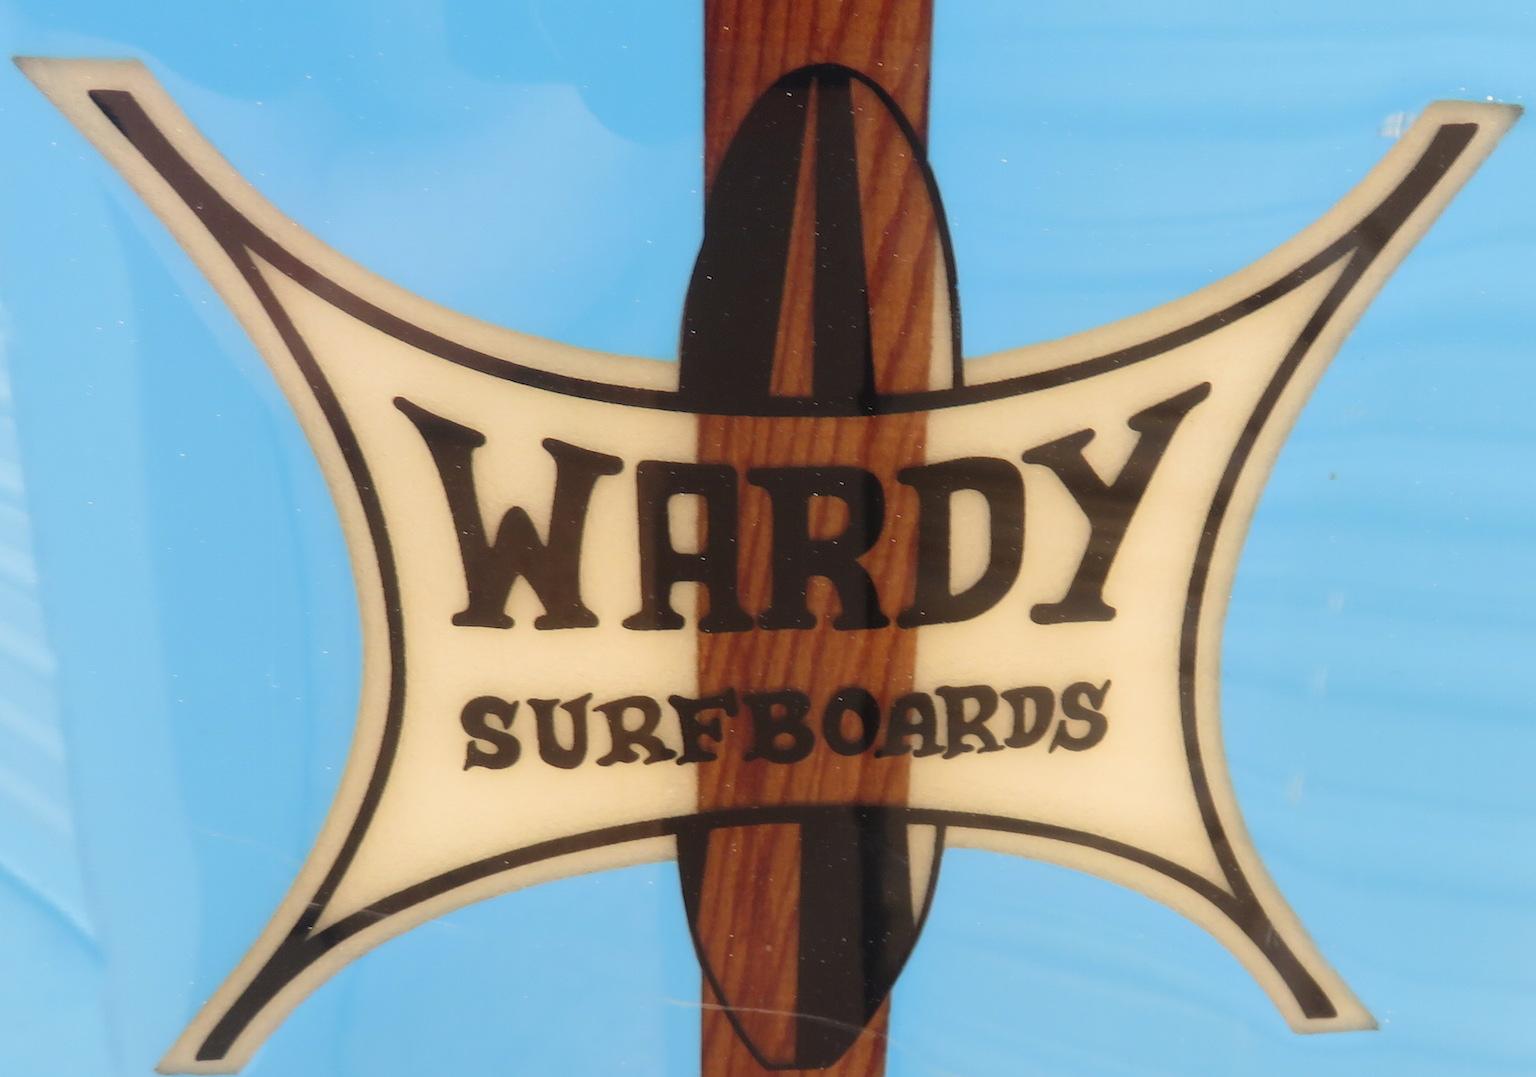 wardy surfboards for sale